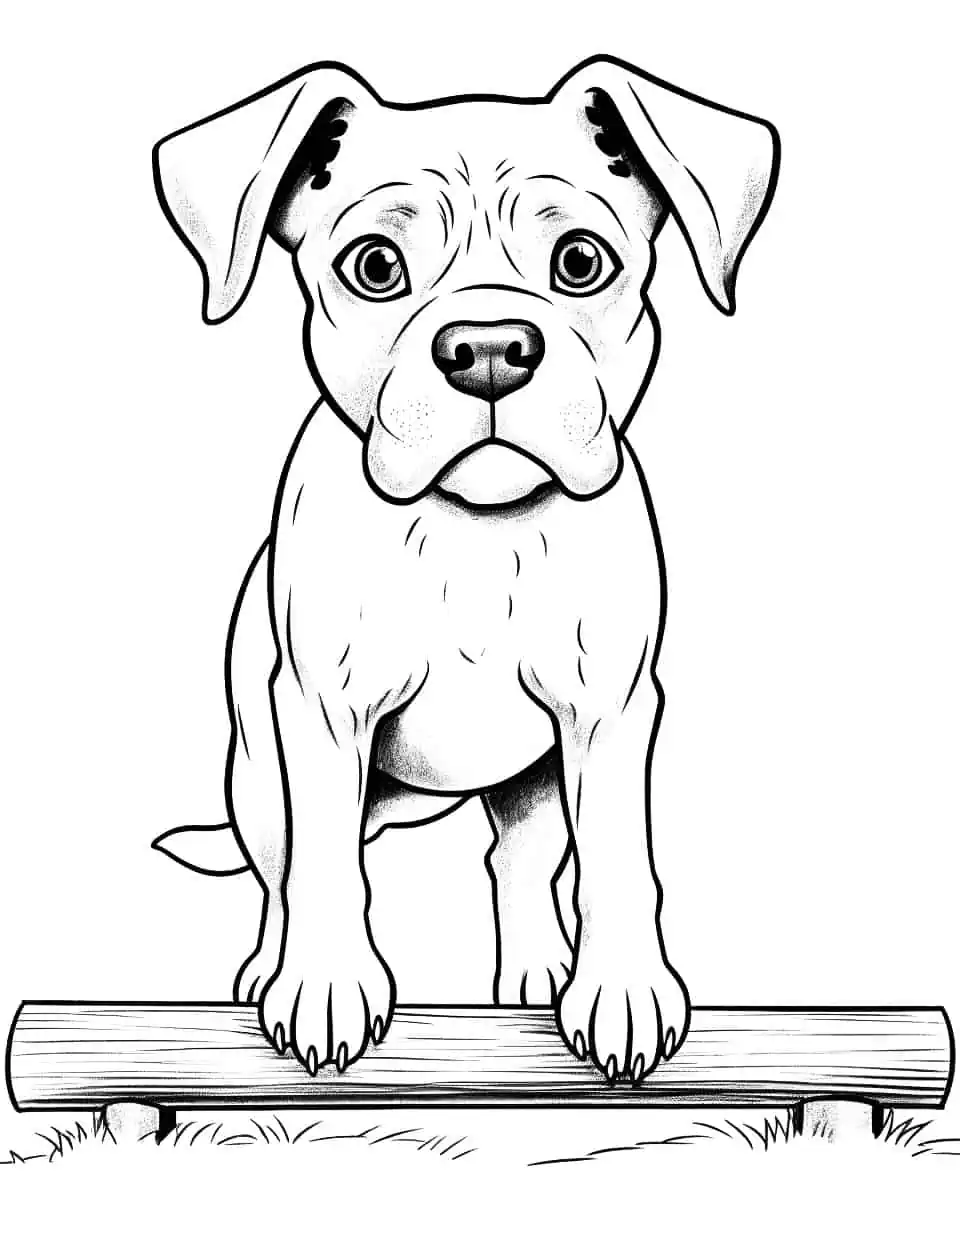 Boxer Training Dog Coloring Page - A strong Boxer dog in the middle of training, doing an agility course.